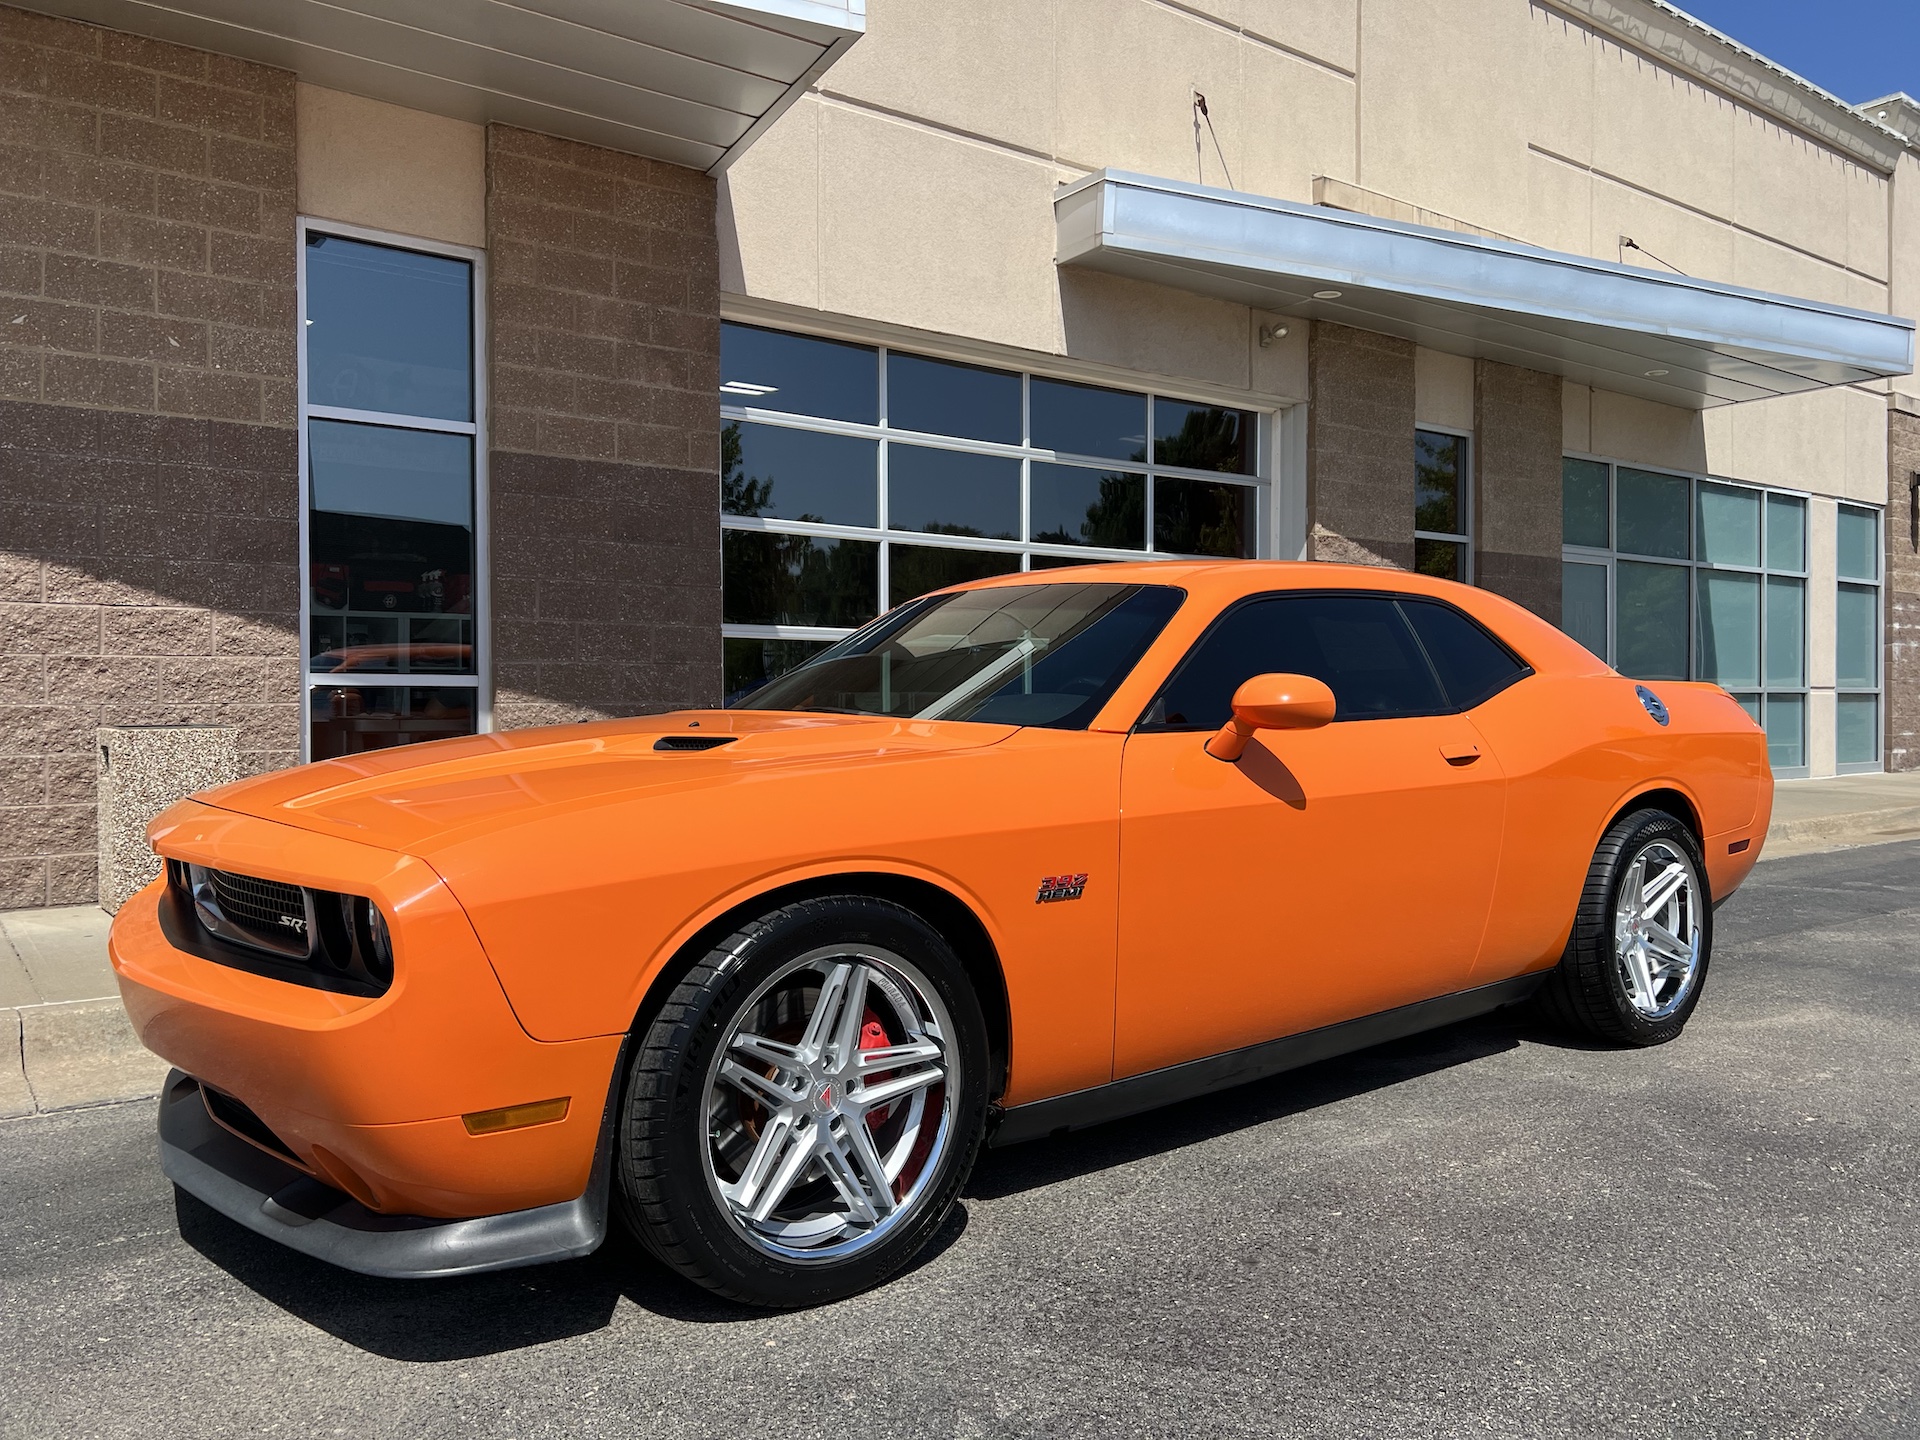  Dodge Challenger with 